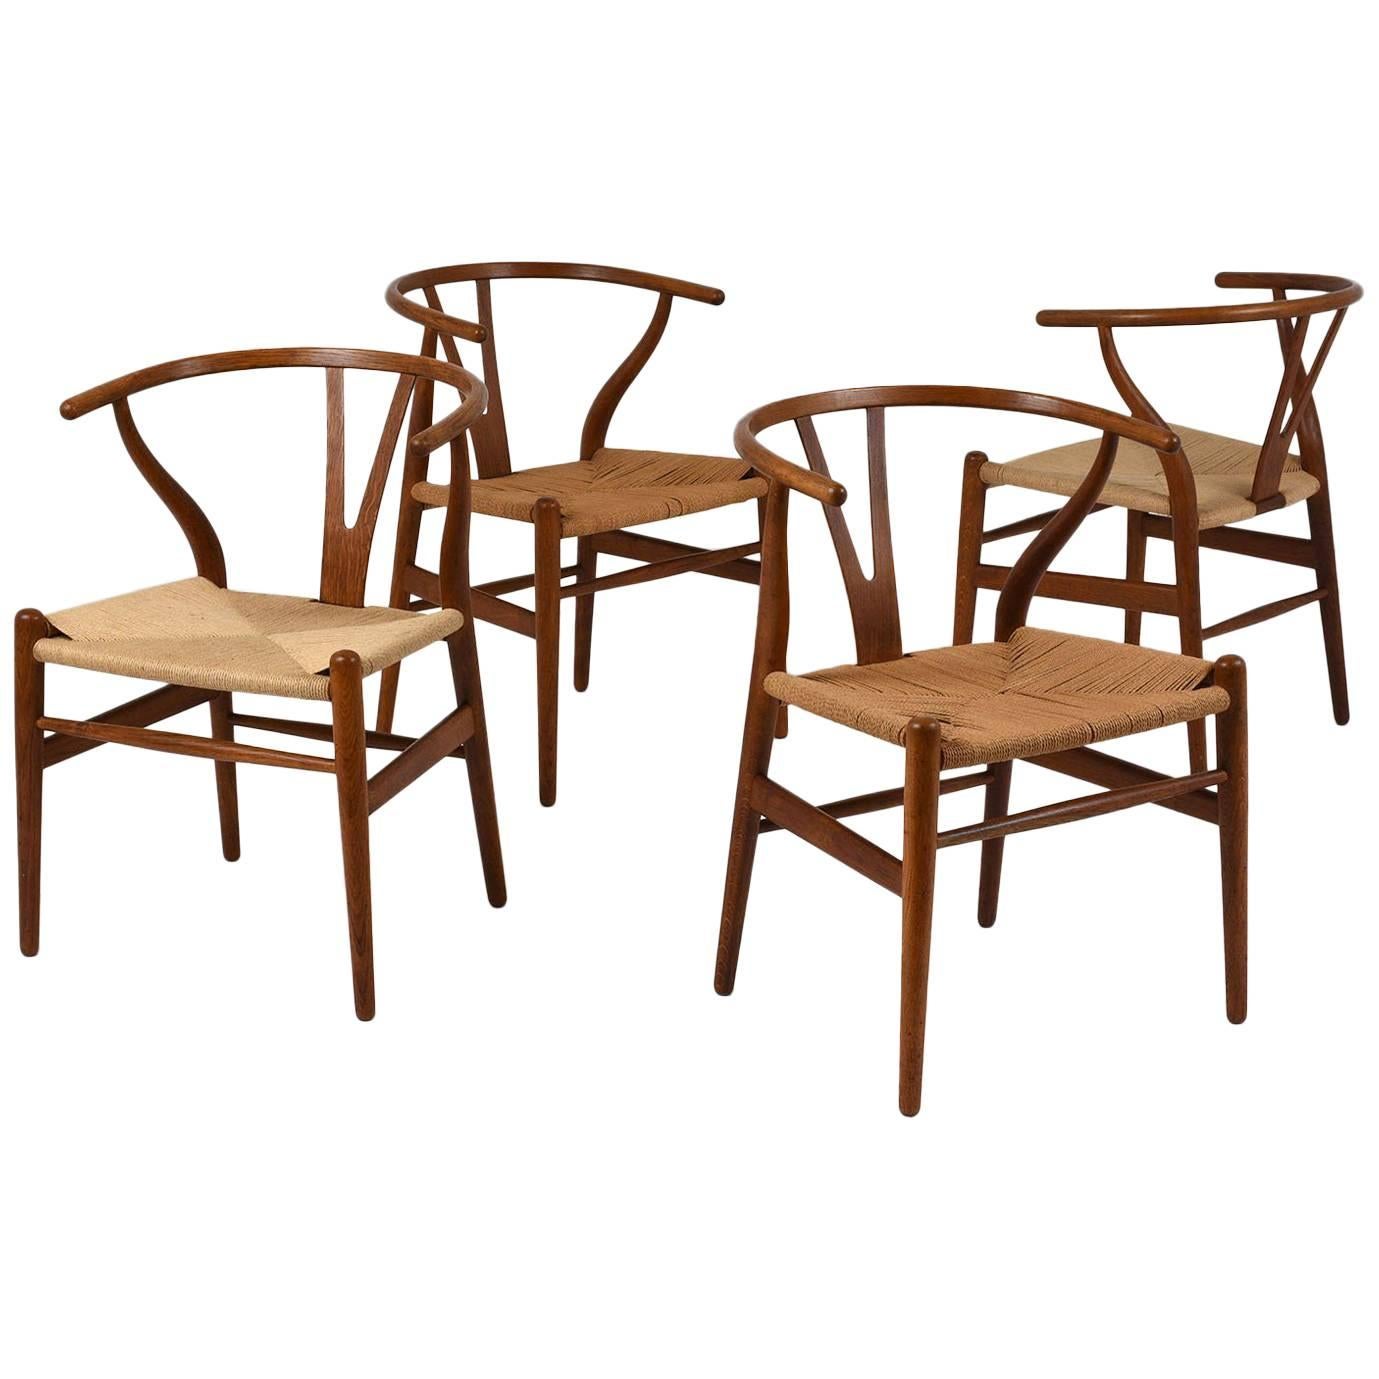 Set of Four Midcentury Danish Dining Chairs